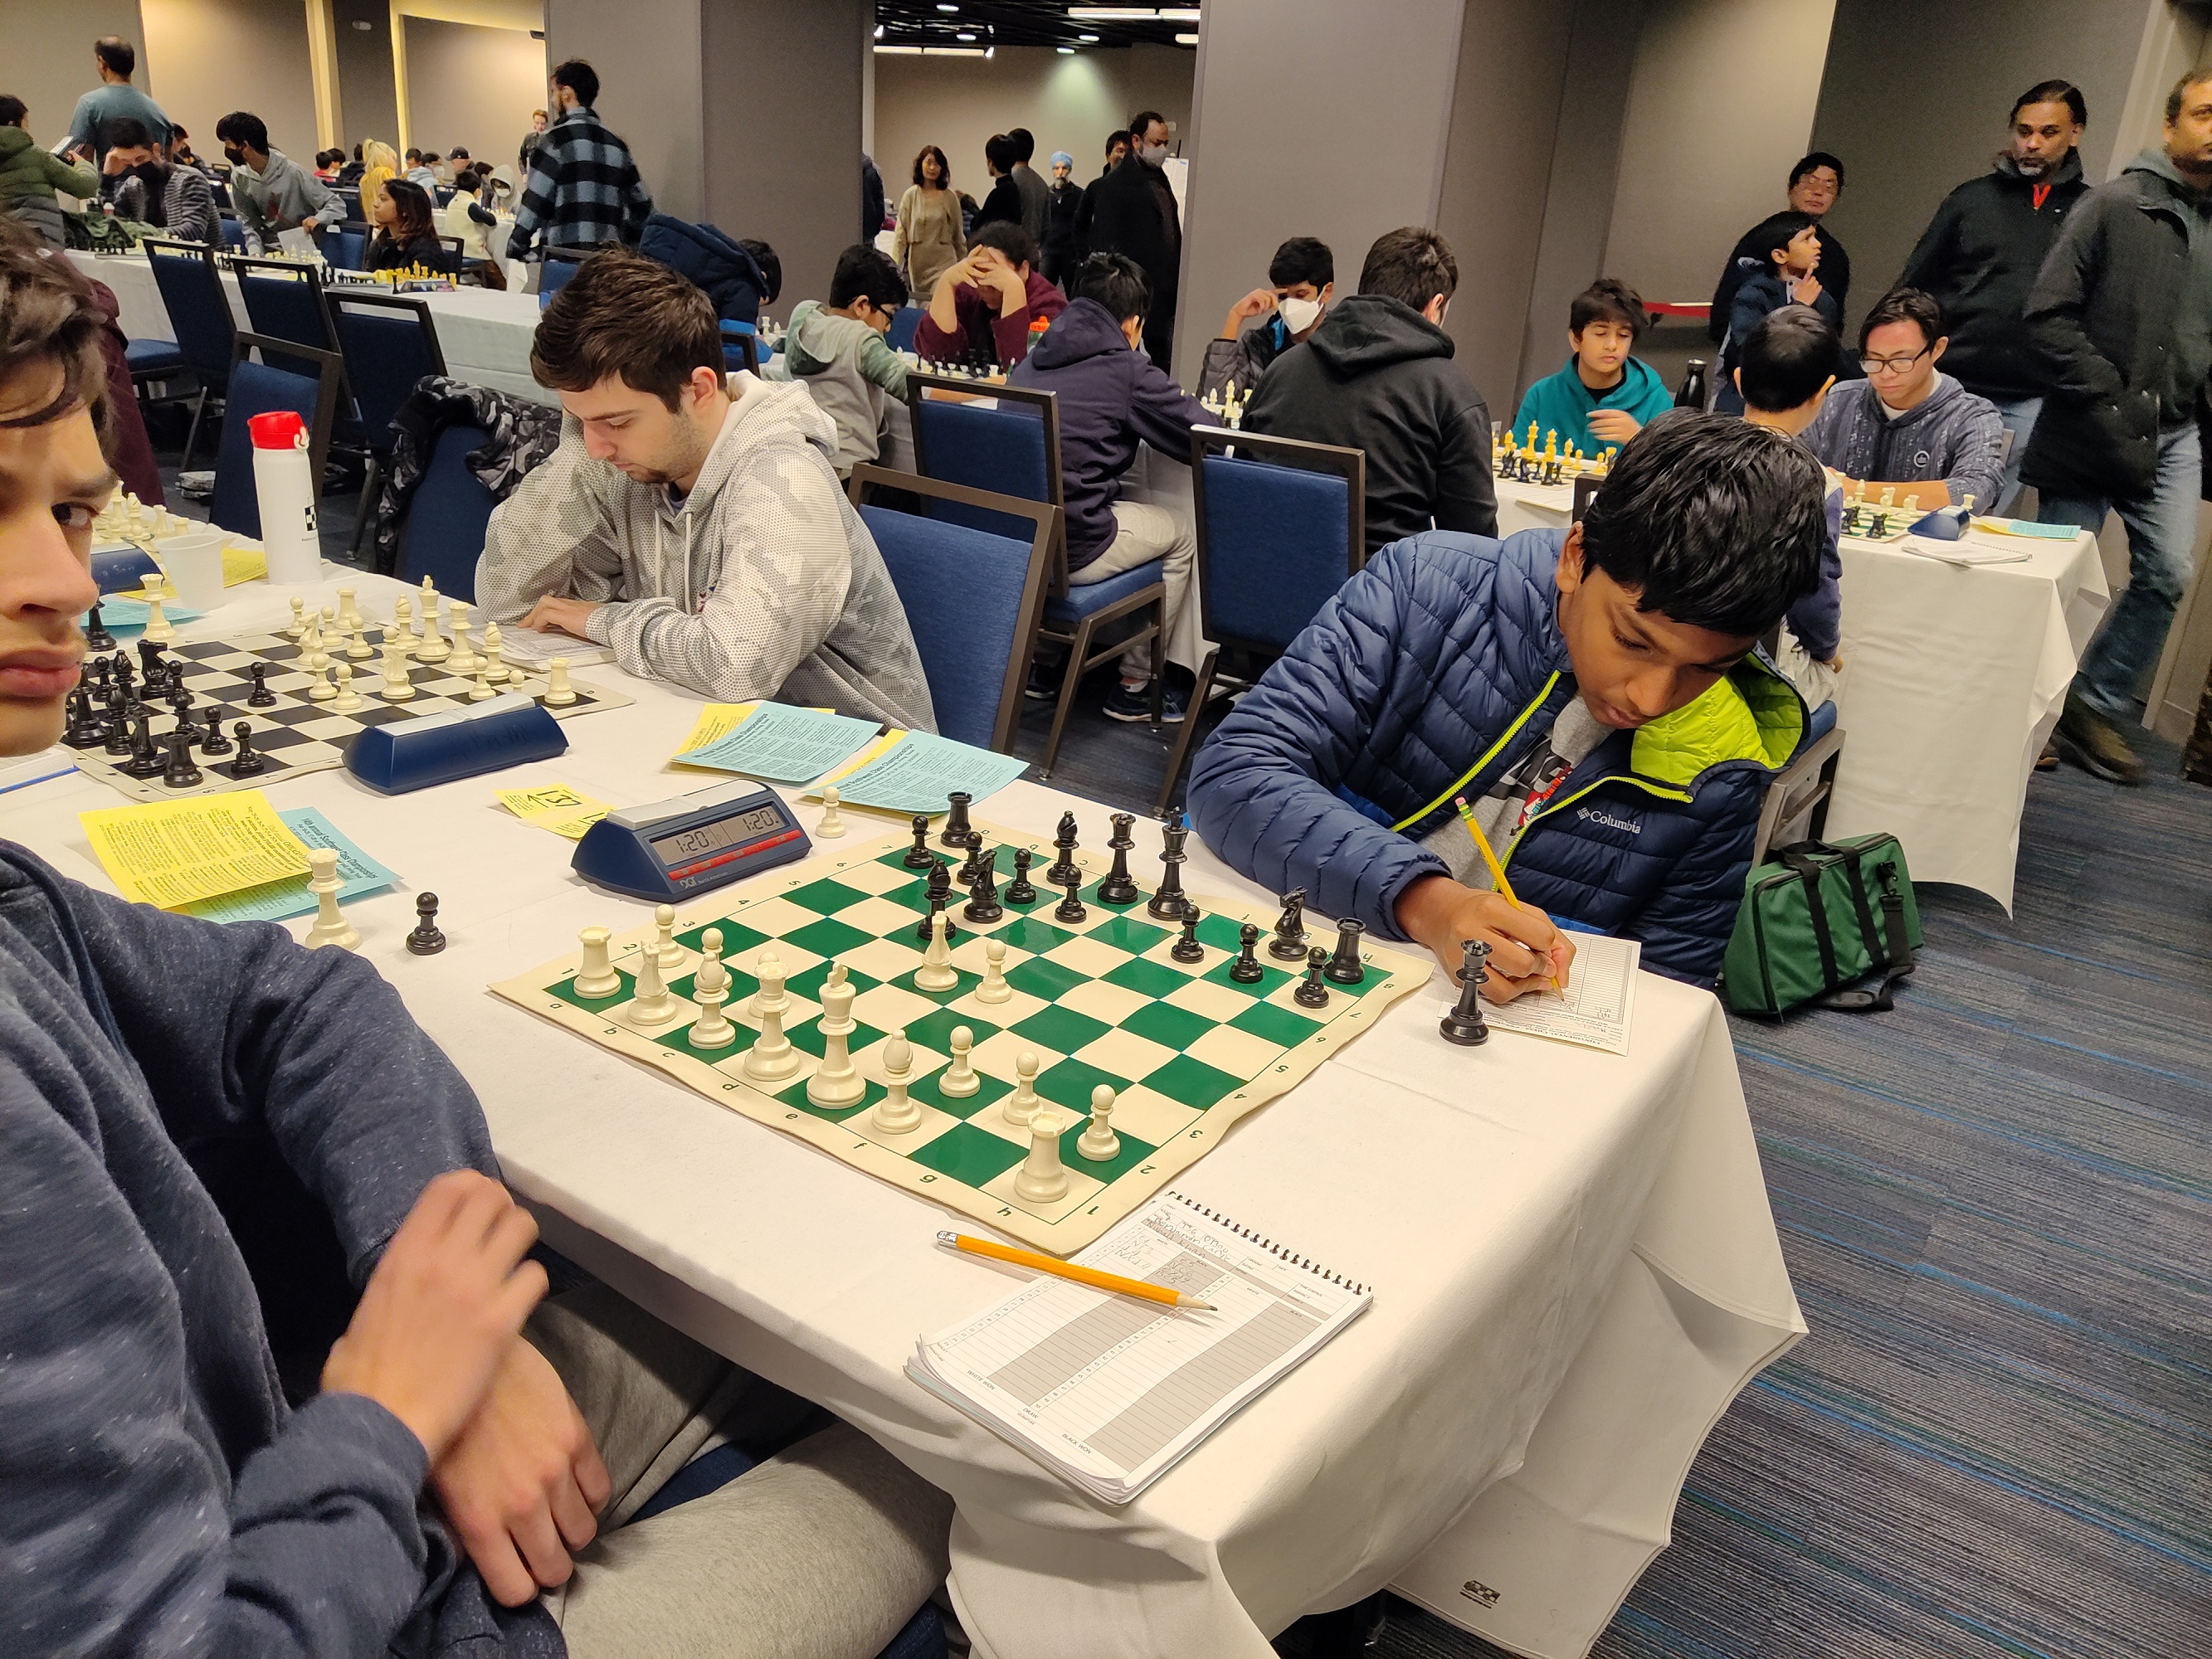 Chess players participate in 46th annual Green Bay Open